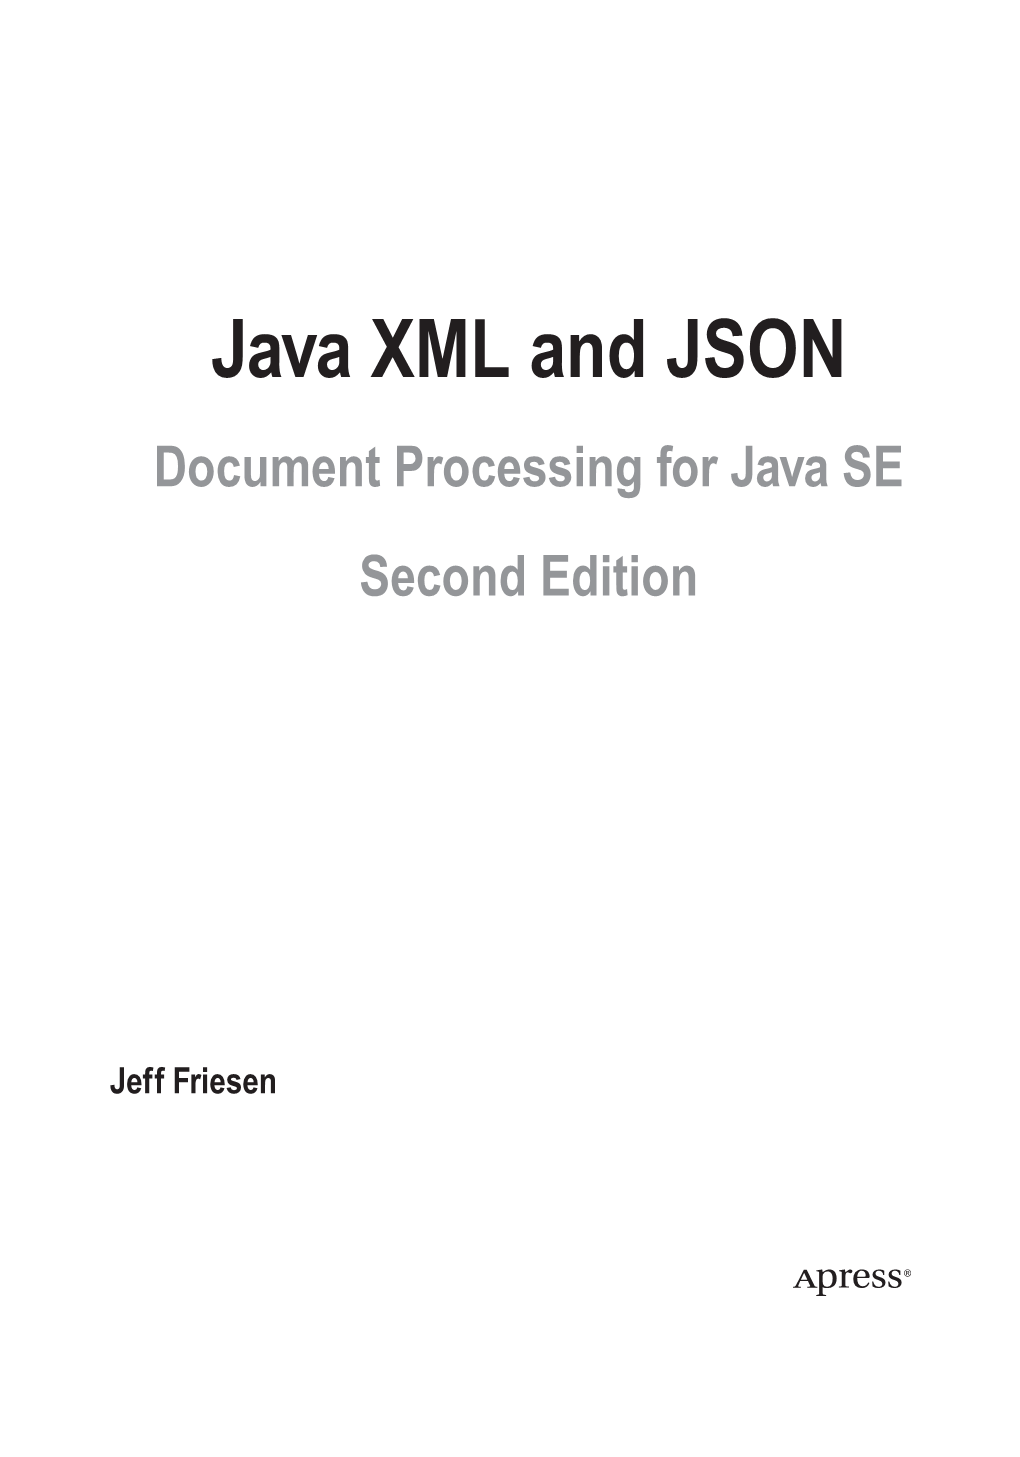 Java XML and JSON Document Processing for Java SE Second Edition